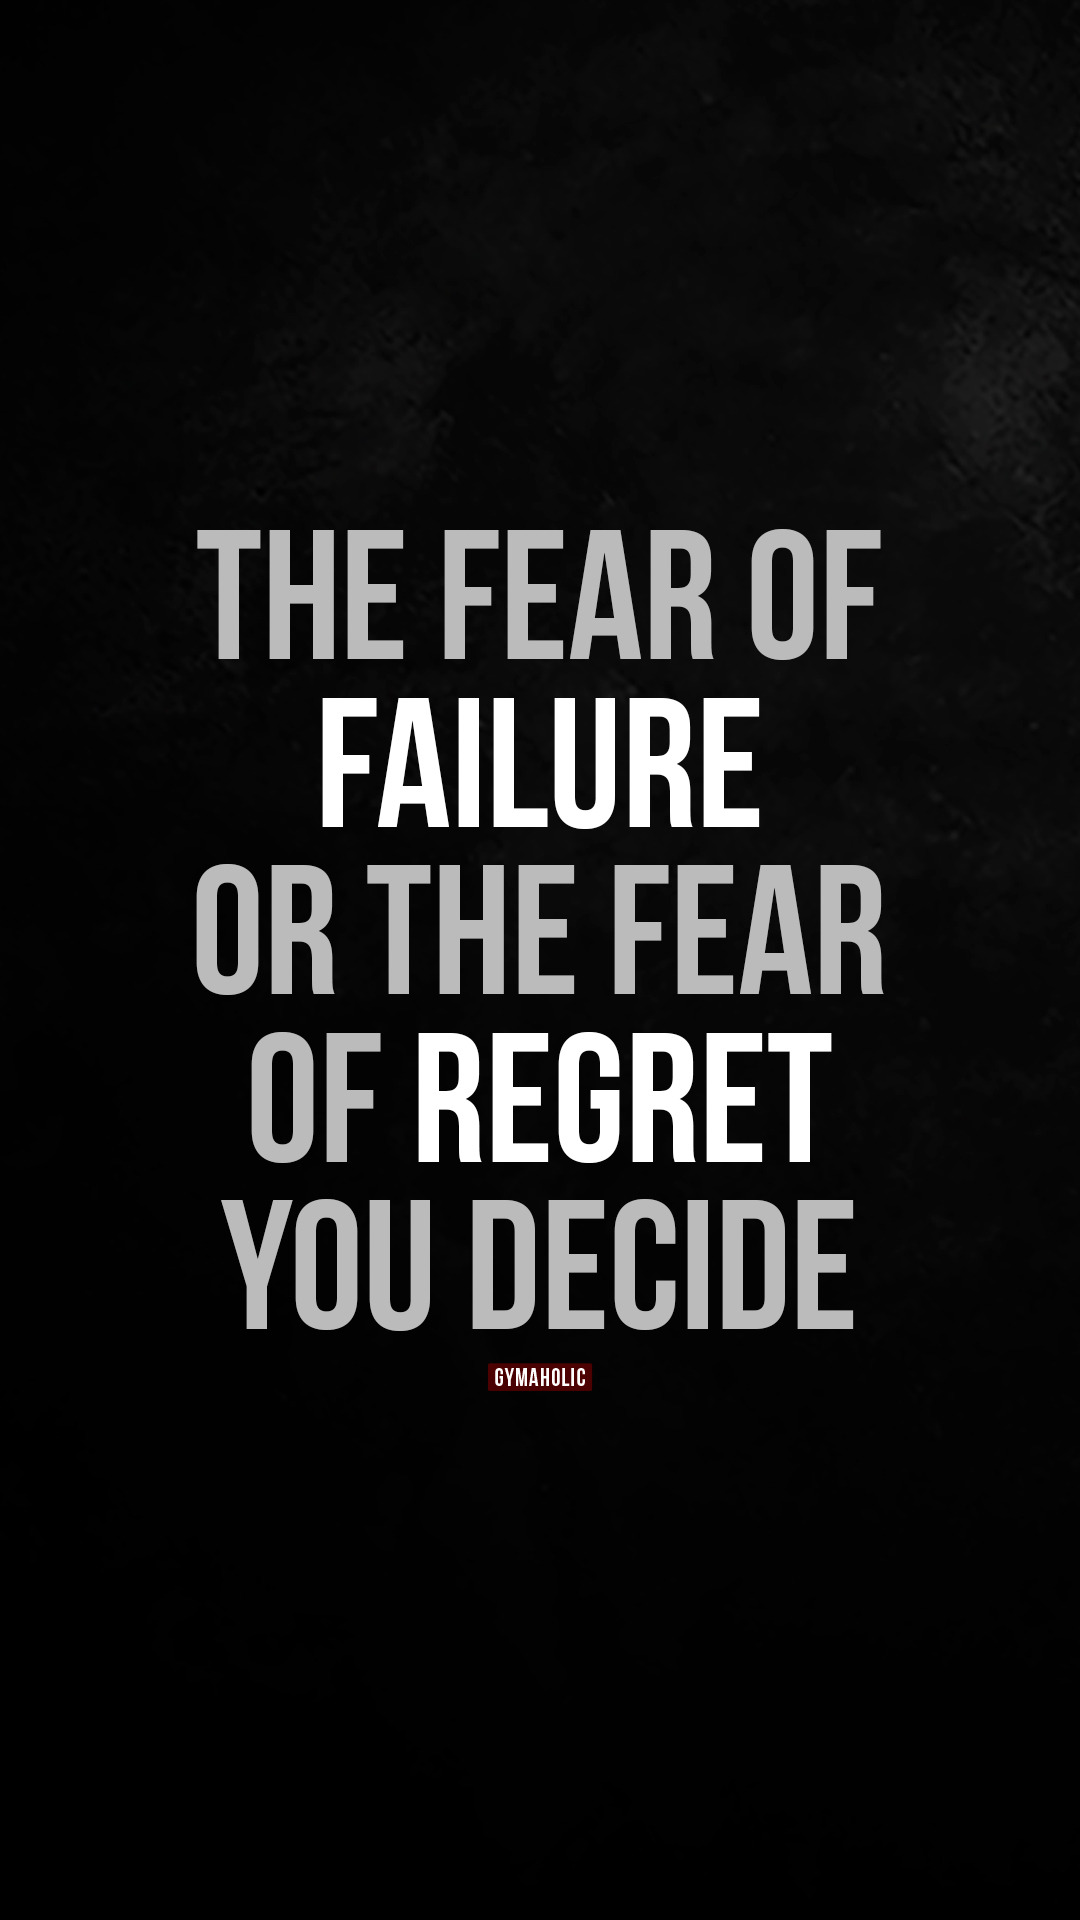 The fear of failure or the fear of regret, you decide